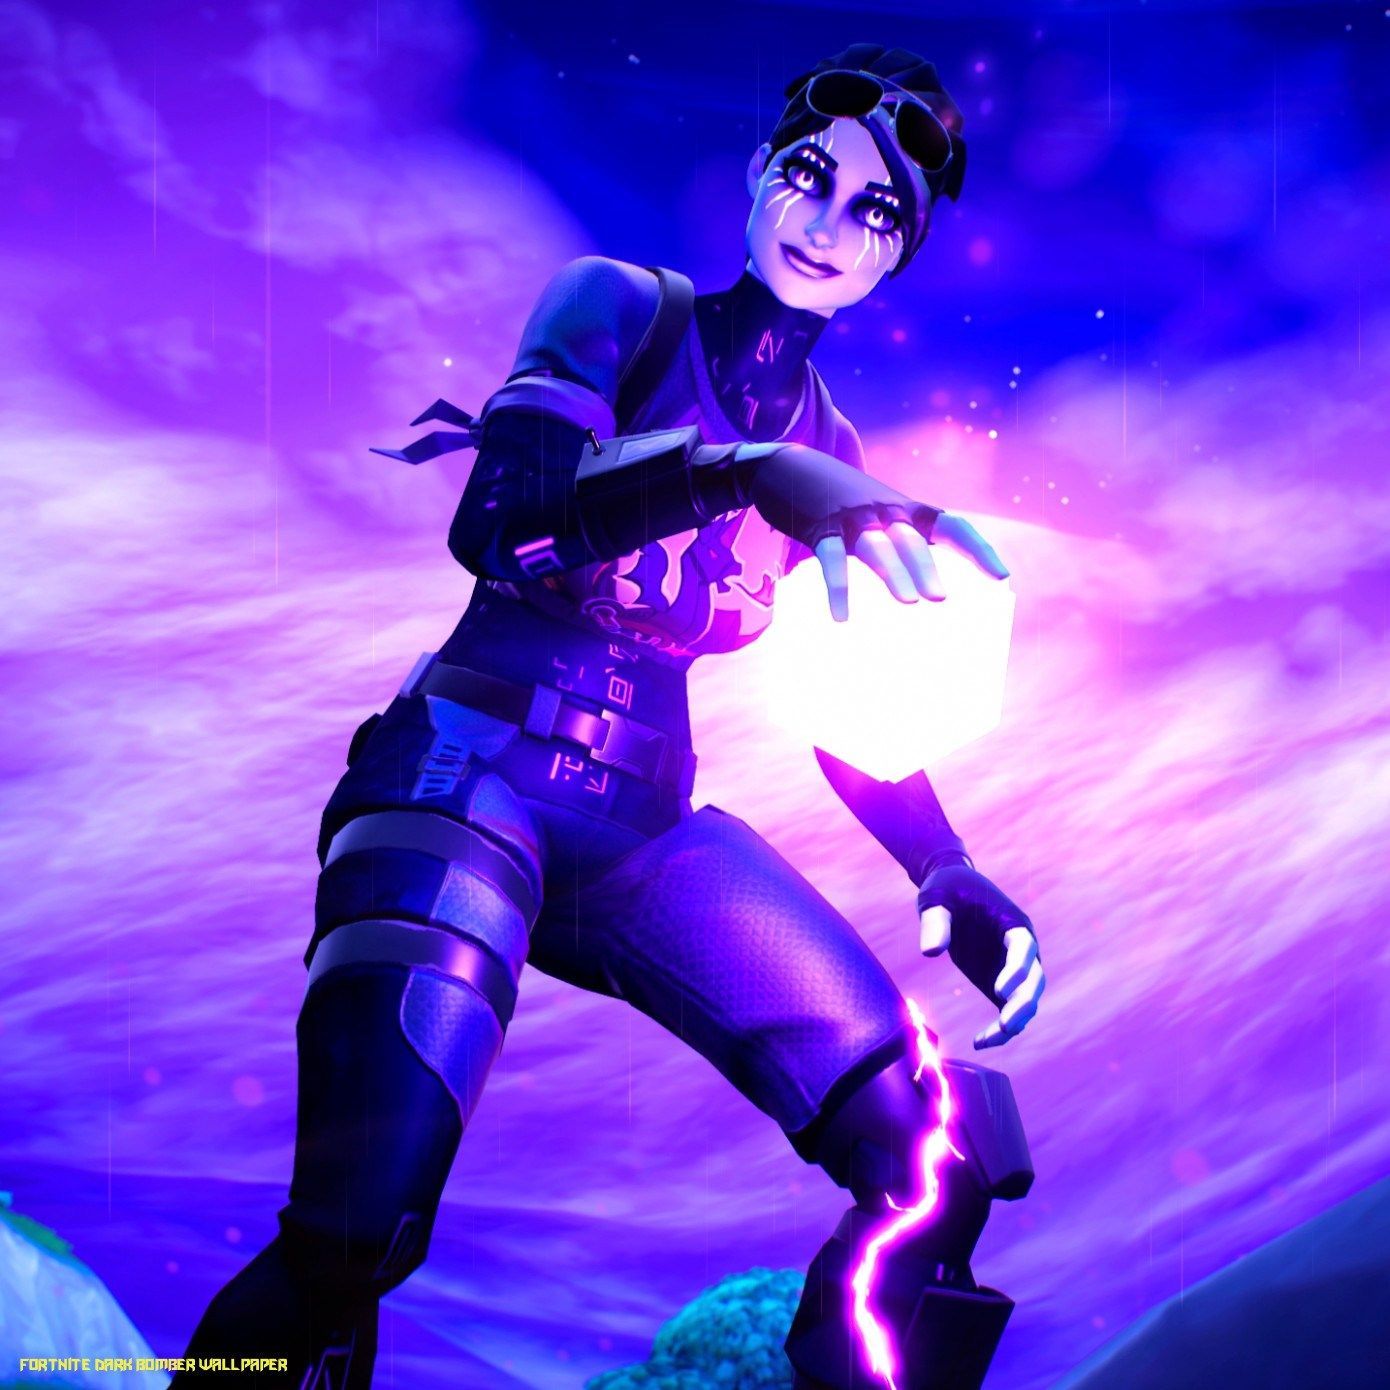 A woman in purple holding up an orb - Fortnite